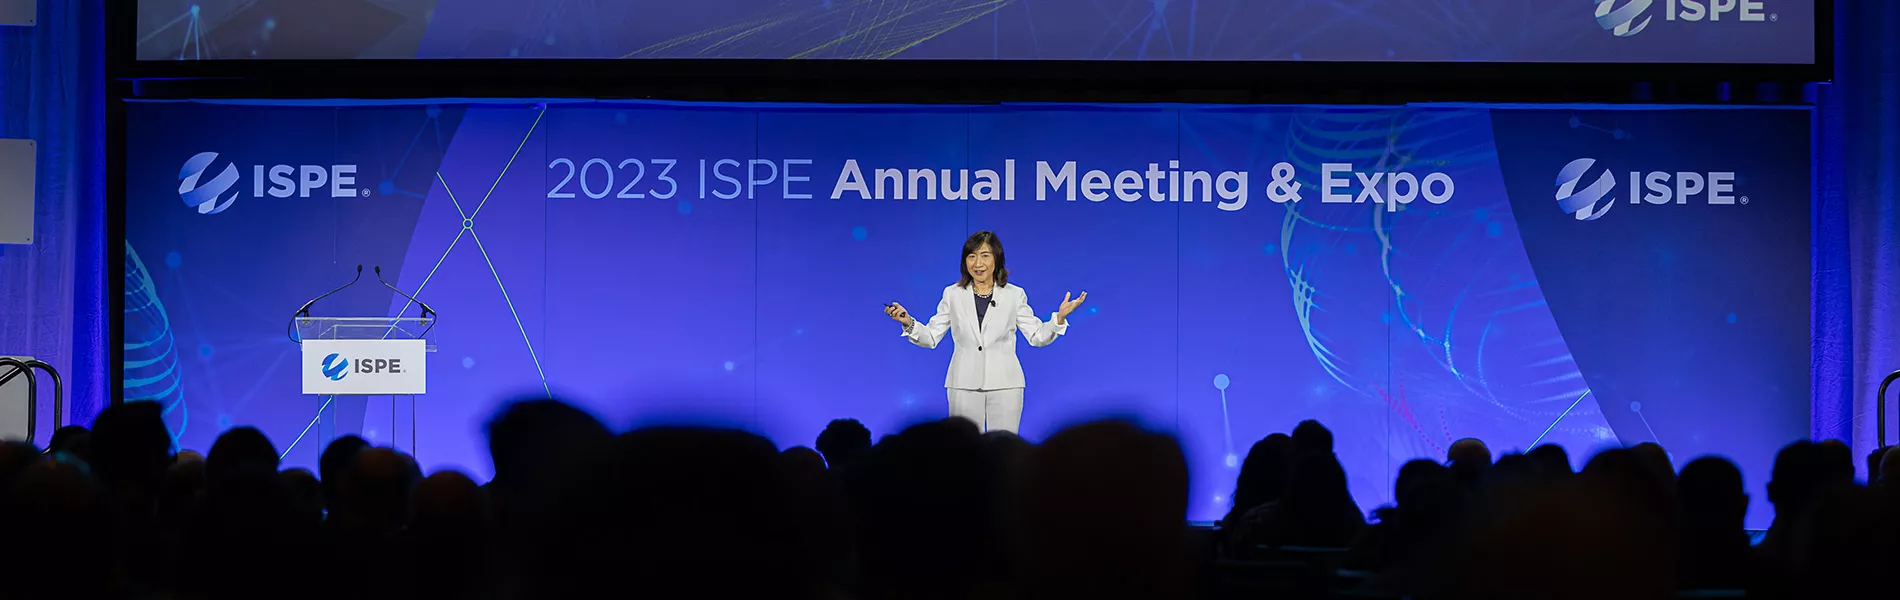 Attend Industry Leading Pharmaceutical Conferences Hosted by ISPE